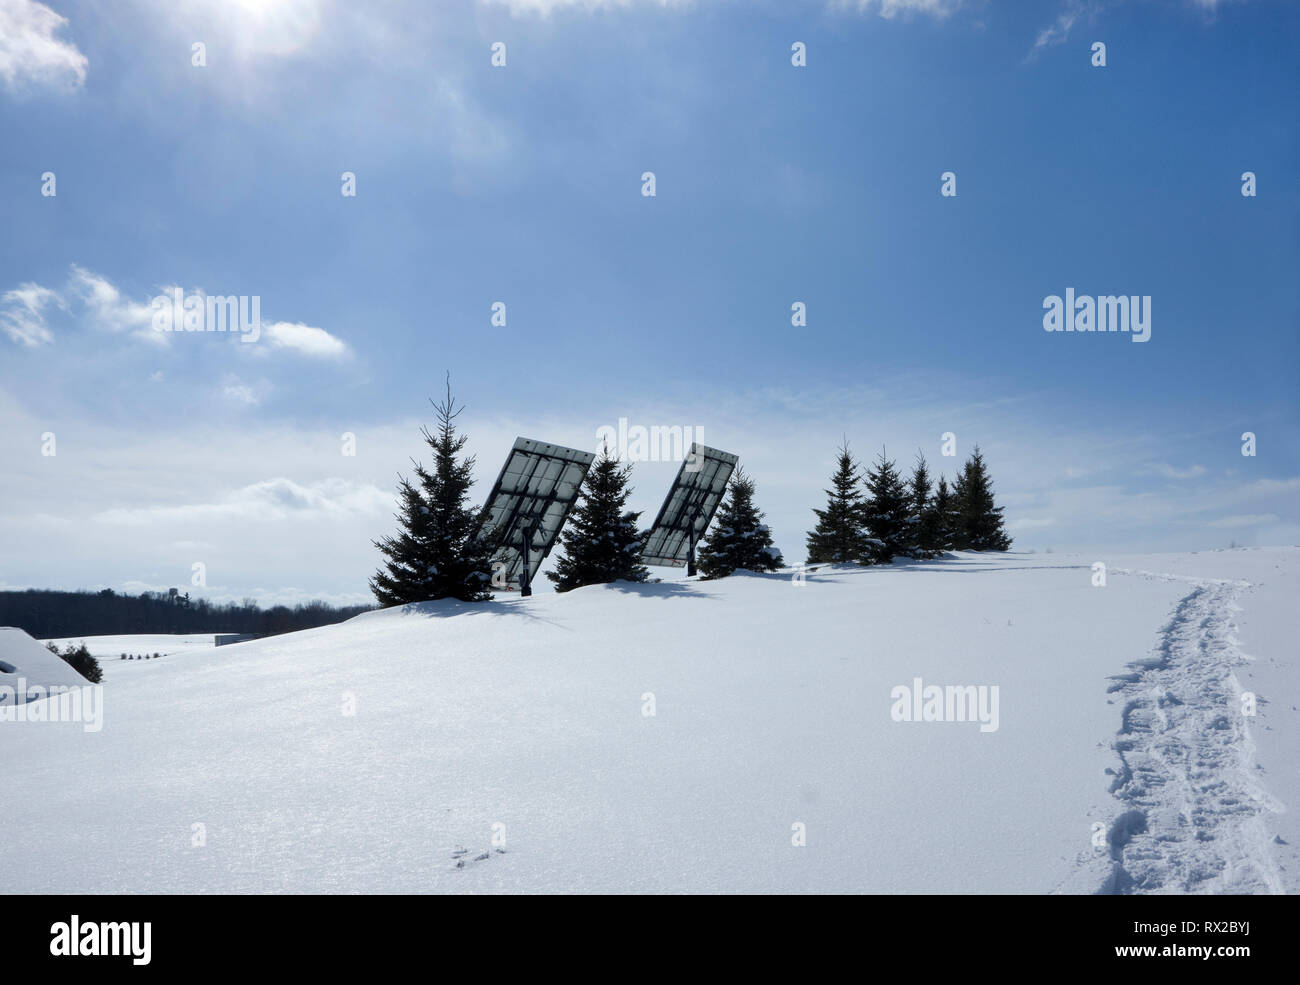 Photovoltaic solar panels on a hilltop with a row of spruce trees as a windbreak in a winter rural setting. Stock Photo